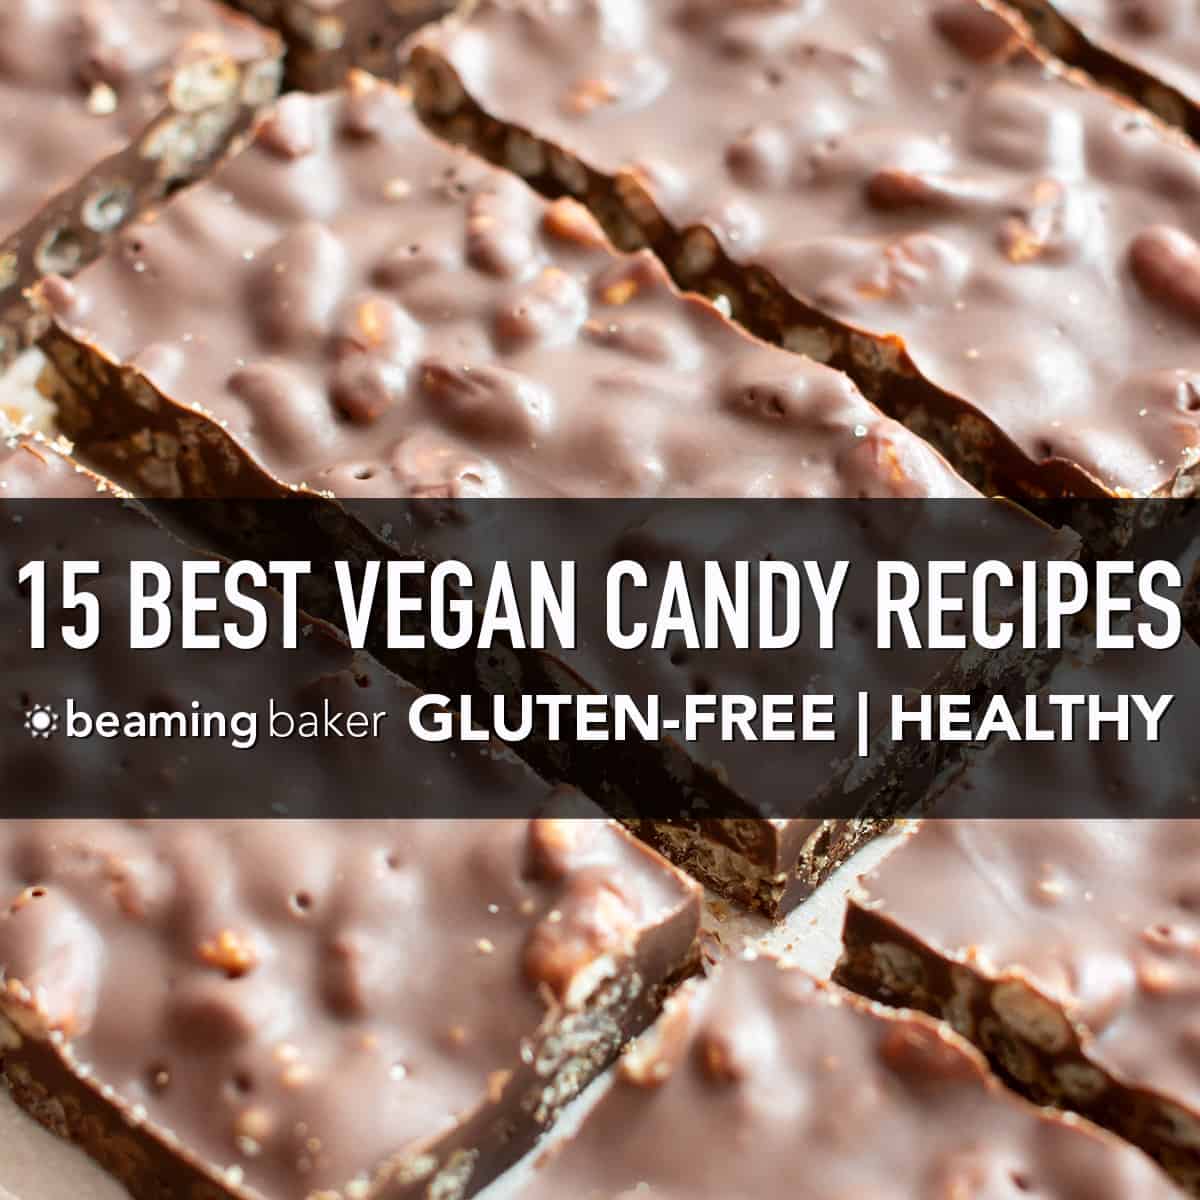 15 Best Vegan Candy and Chocolate Recipes (Gluten-Free, Healthy)